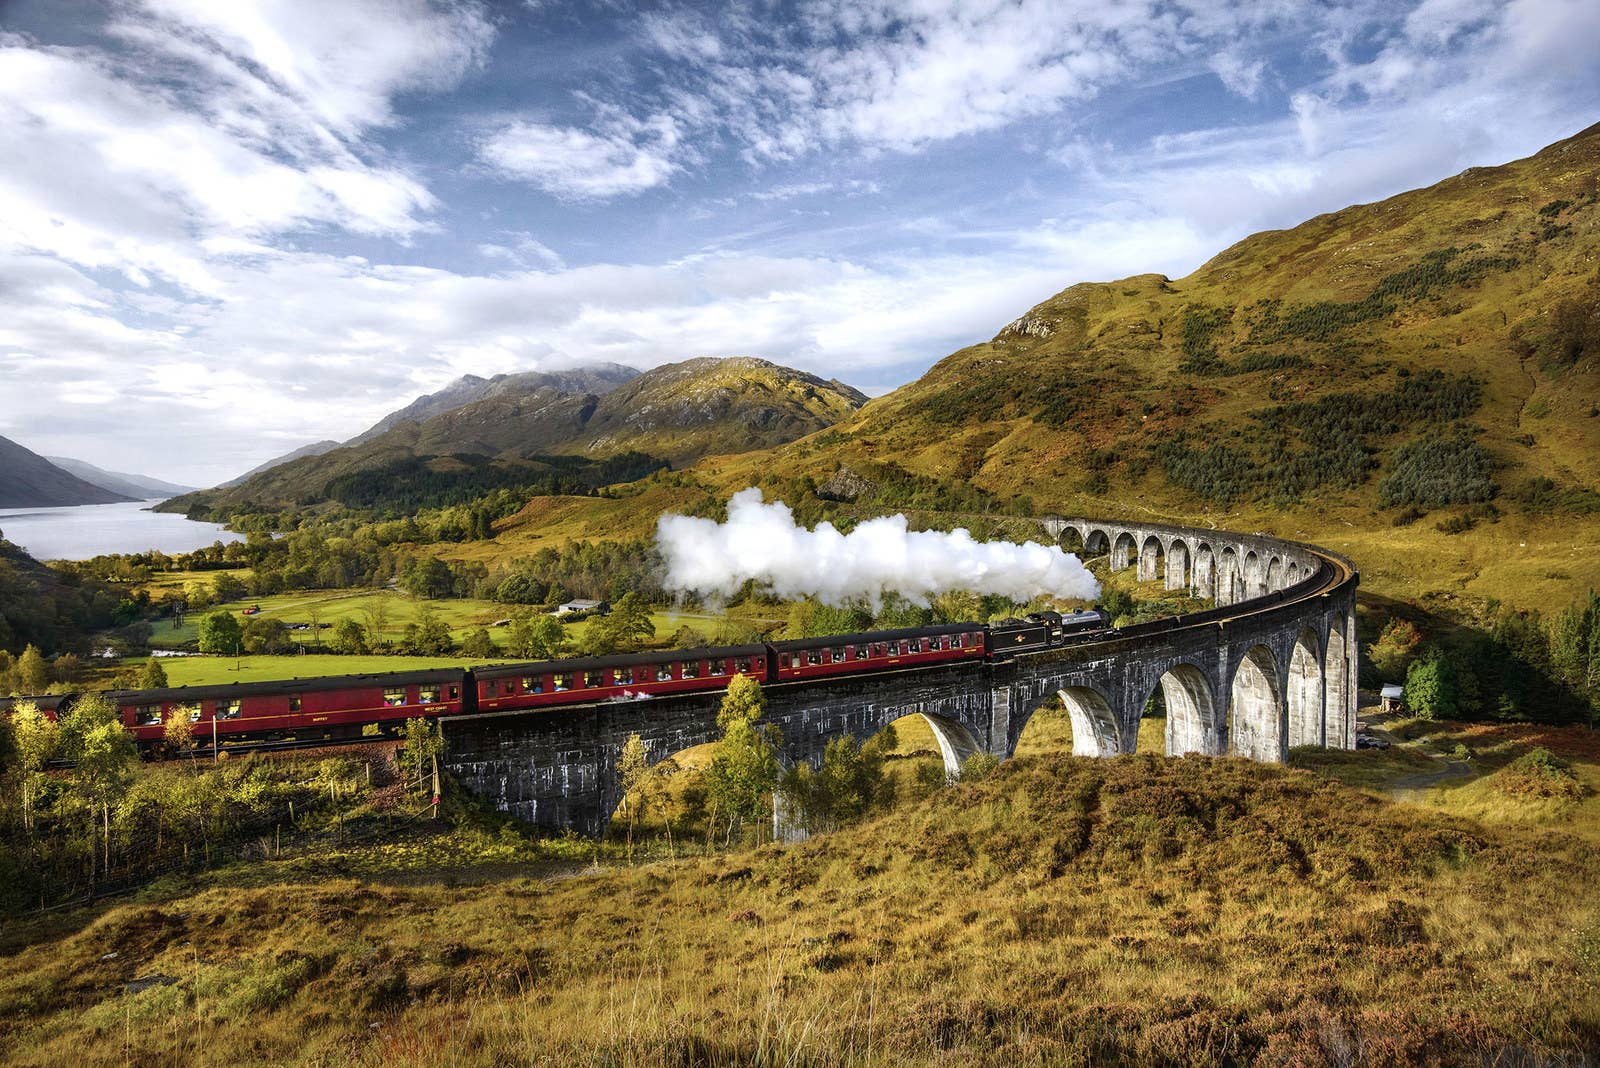 Dubbed by many as the &quot;Hogwarts Express,&quot; the Jacobite steam train runs from Fort William to Mallaig and was made famous by the Harry Potter films.